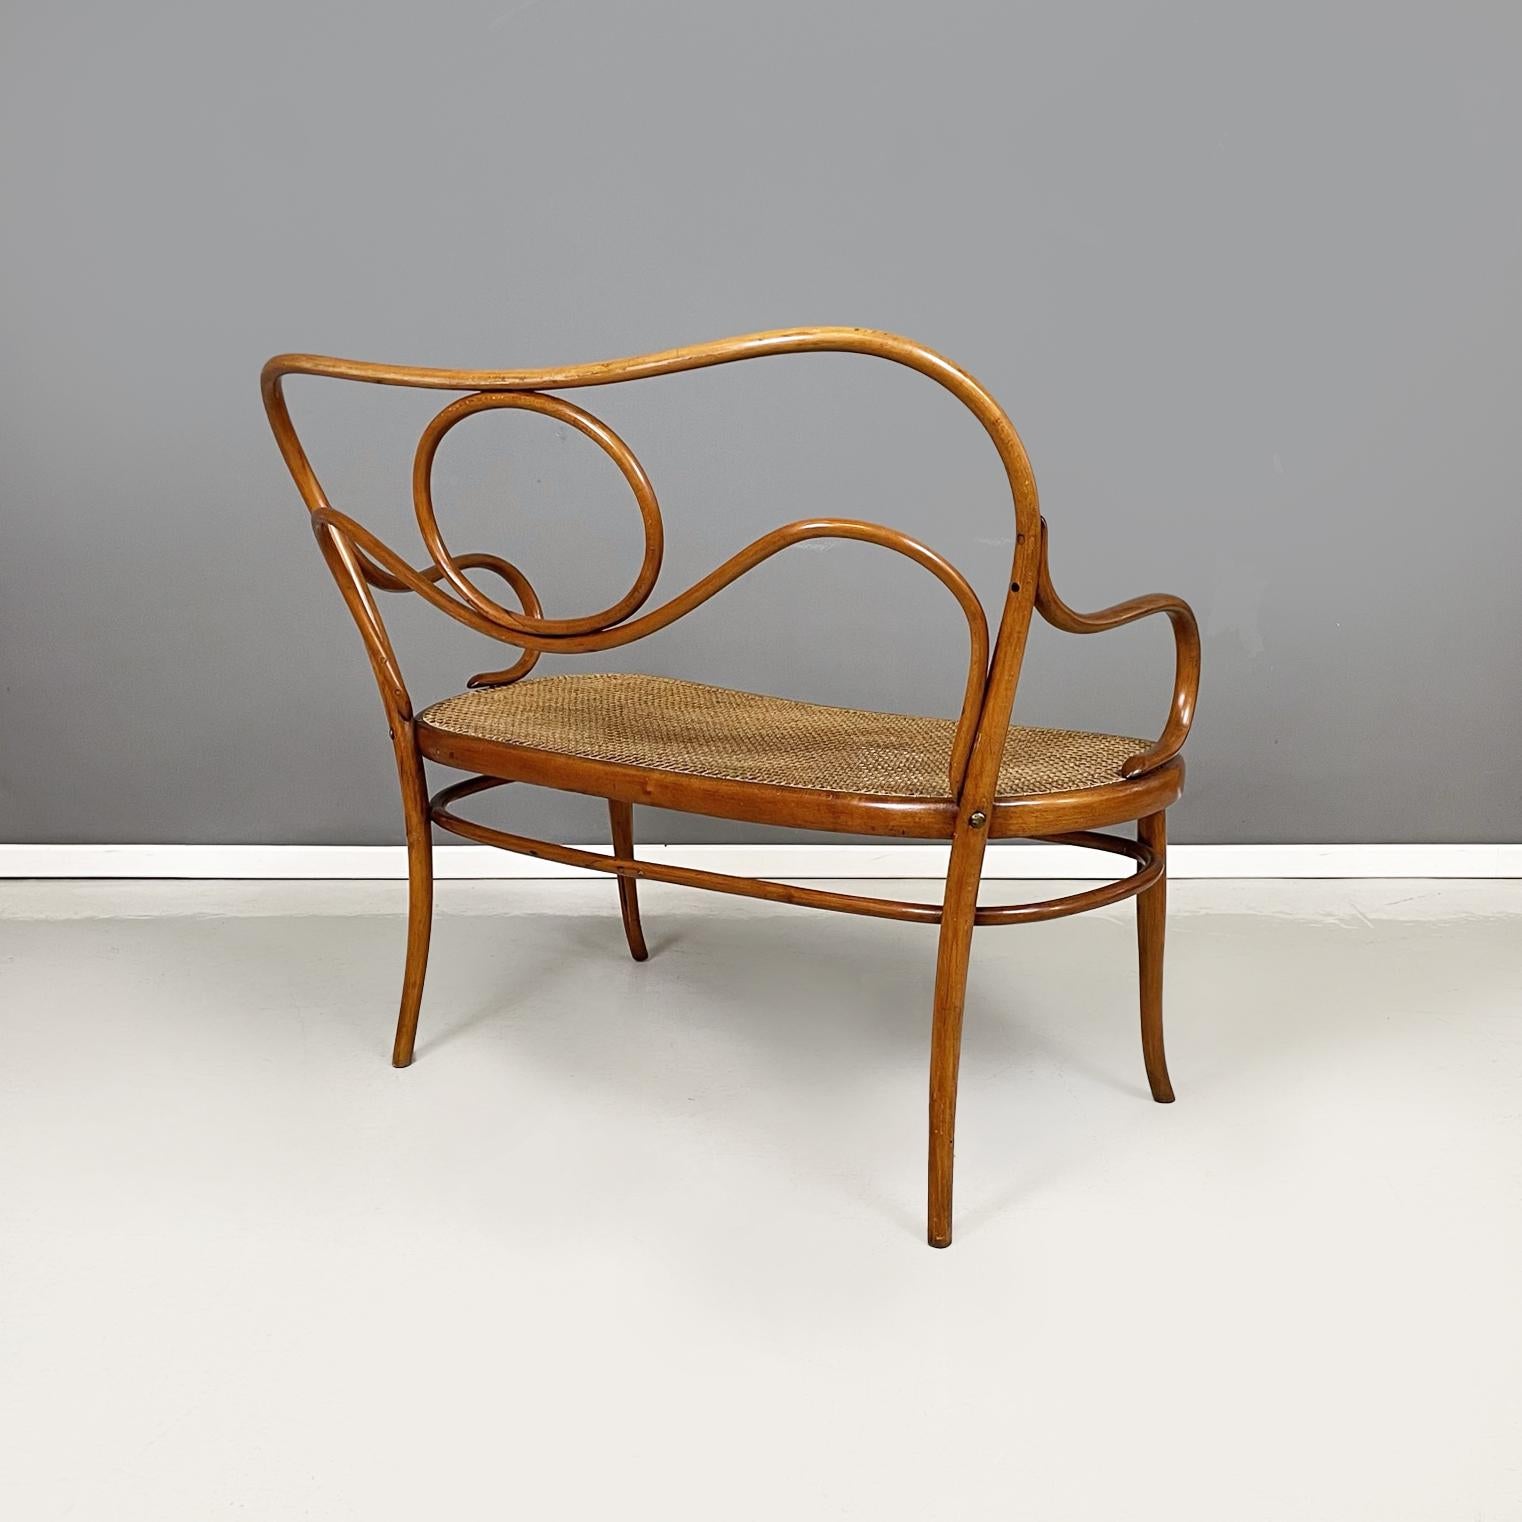 20th Century Austrian antique Wooden and Vienna straw two-seater bench by Thonet, early 1900s